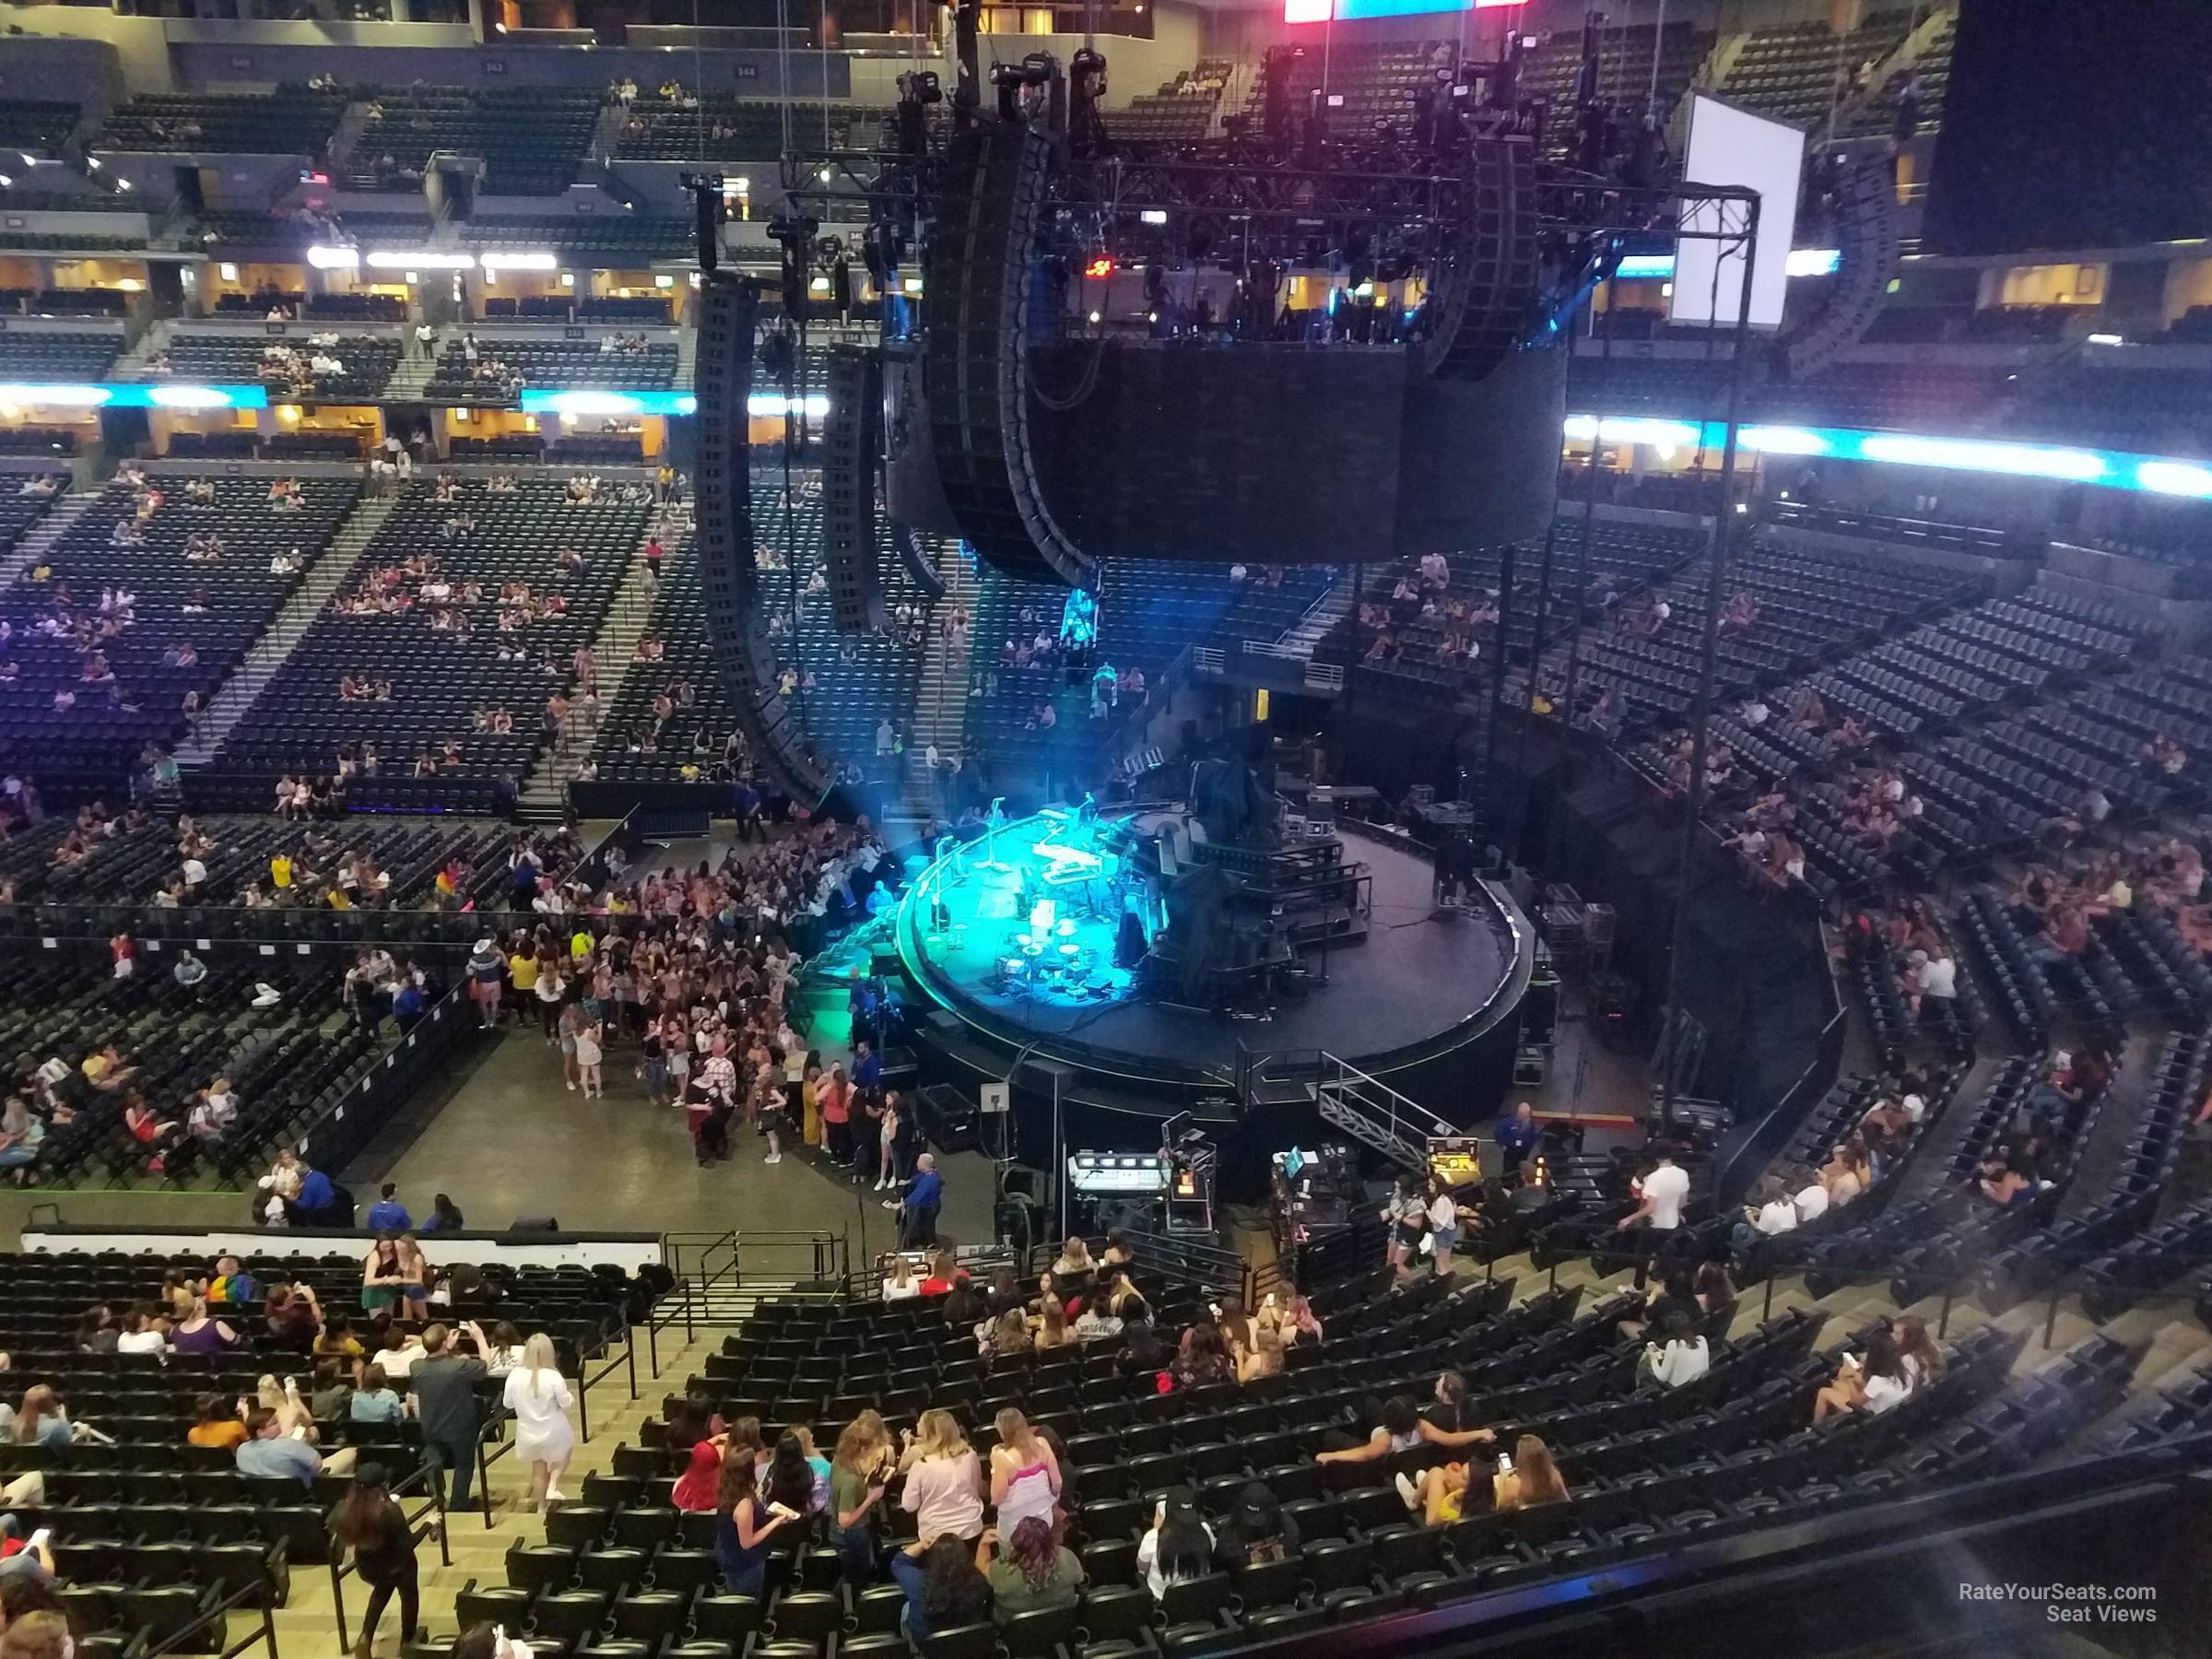 section 256, row 4 seat view  for concert - ball arena